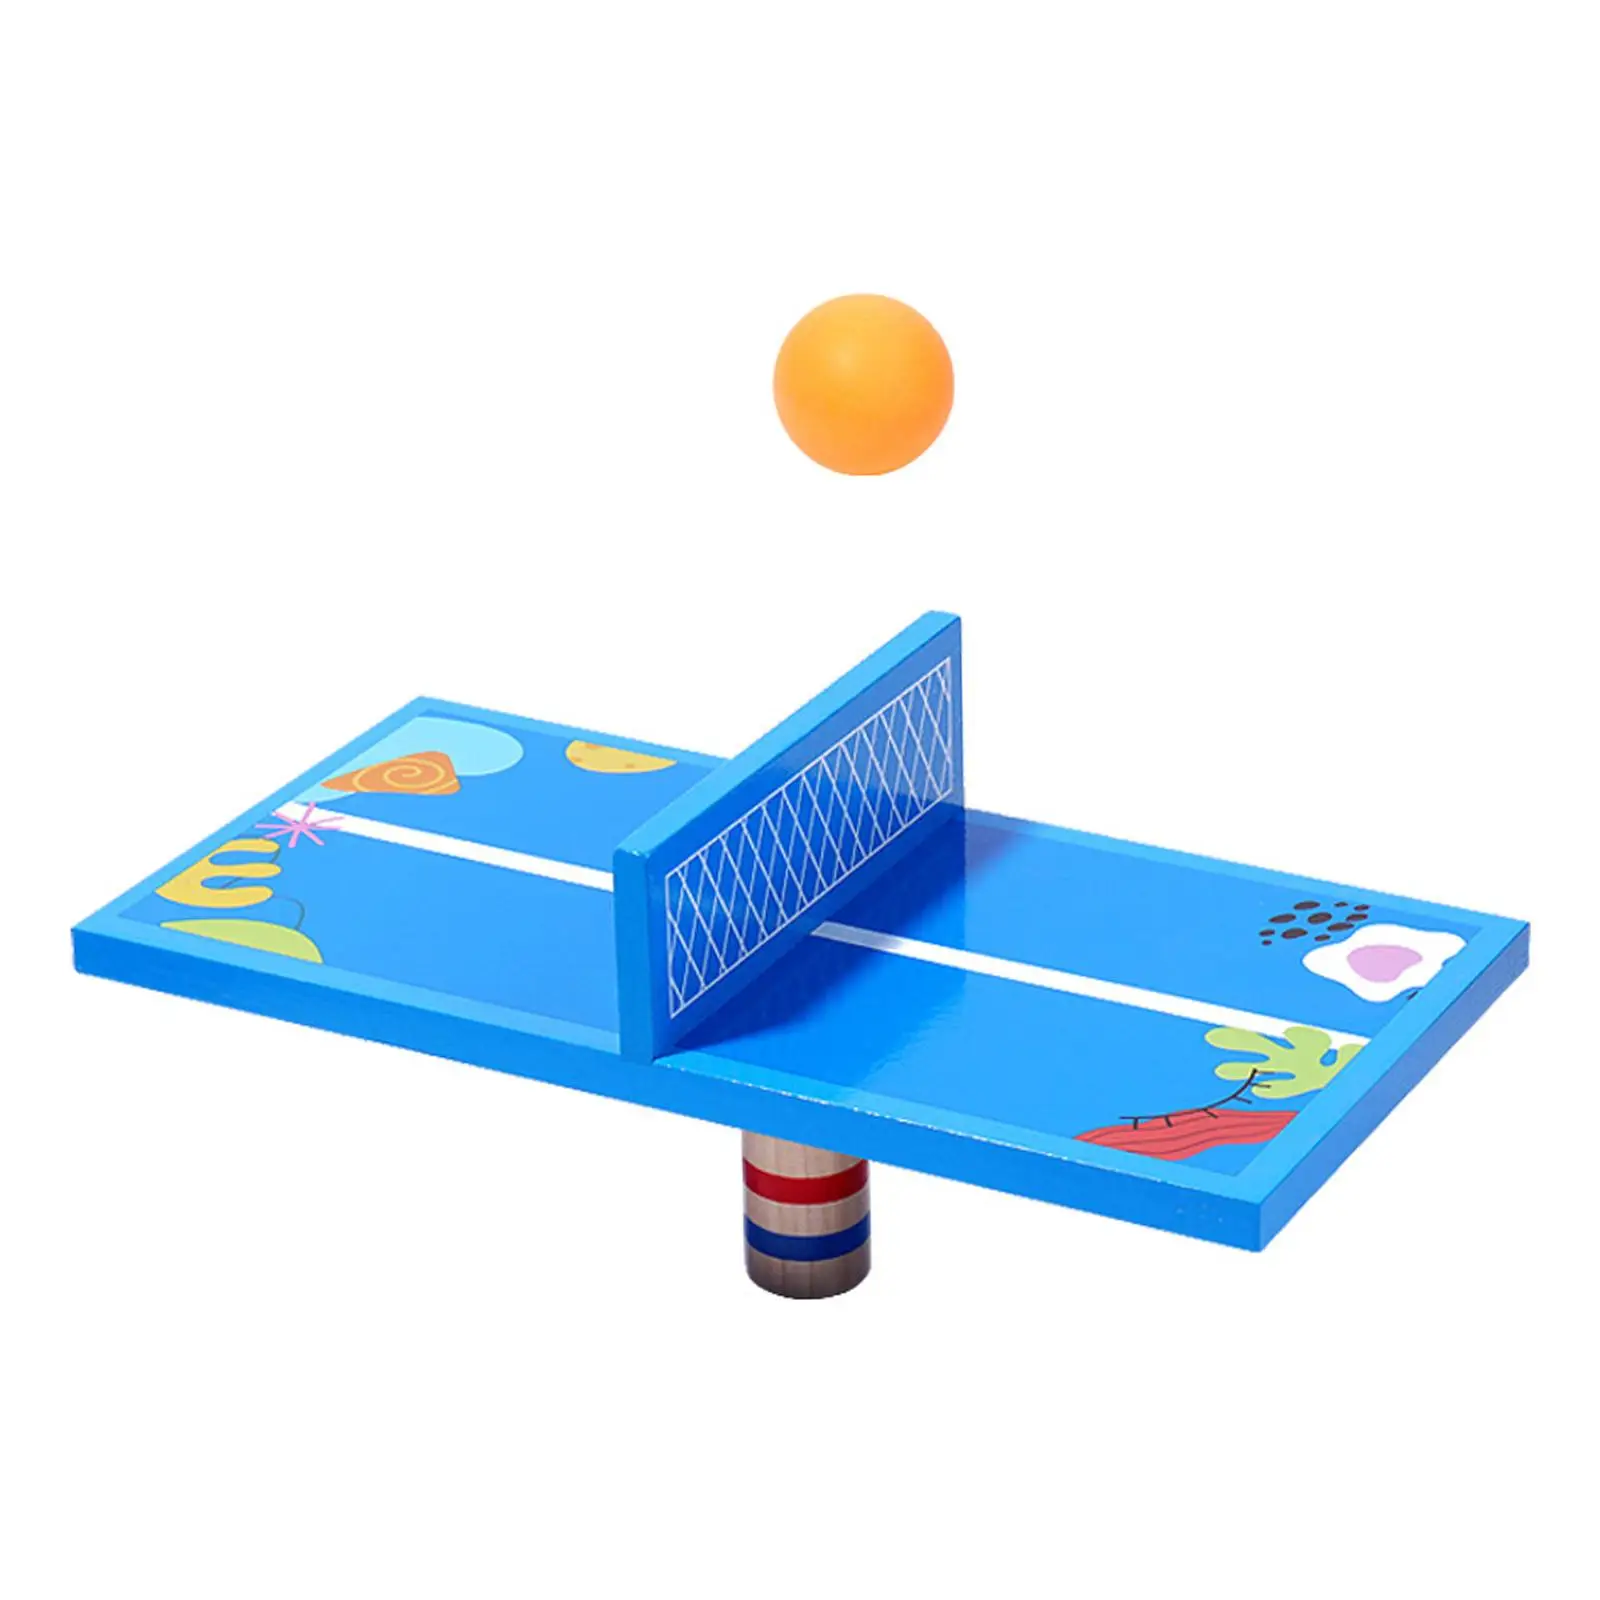 Mini Table Tennis Game Intellectual Developmental Portable Tabletop Game Early Educational Toy for Girls Kids Birthday Gifts